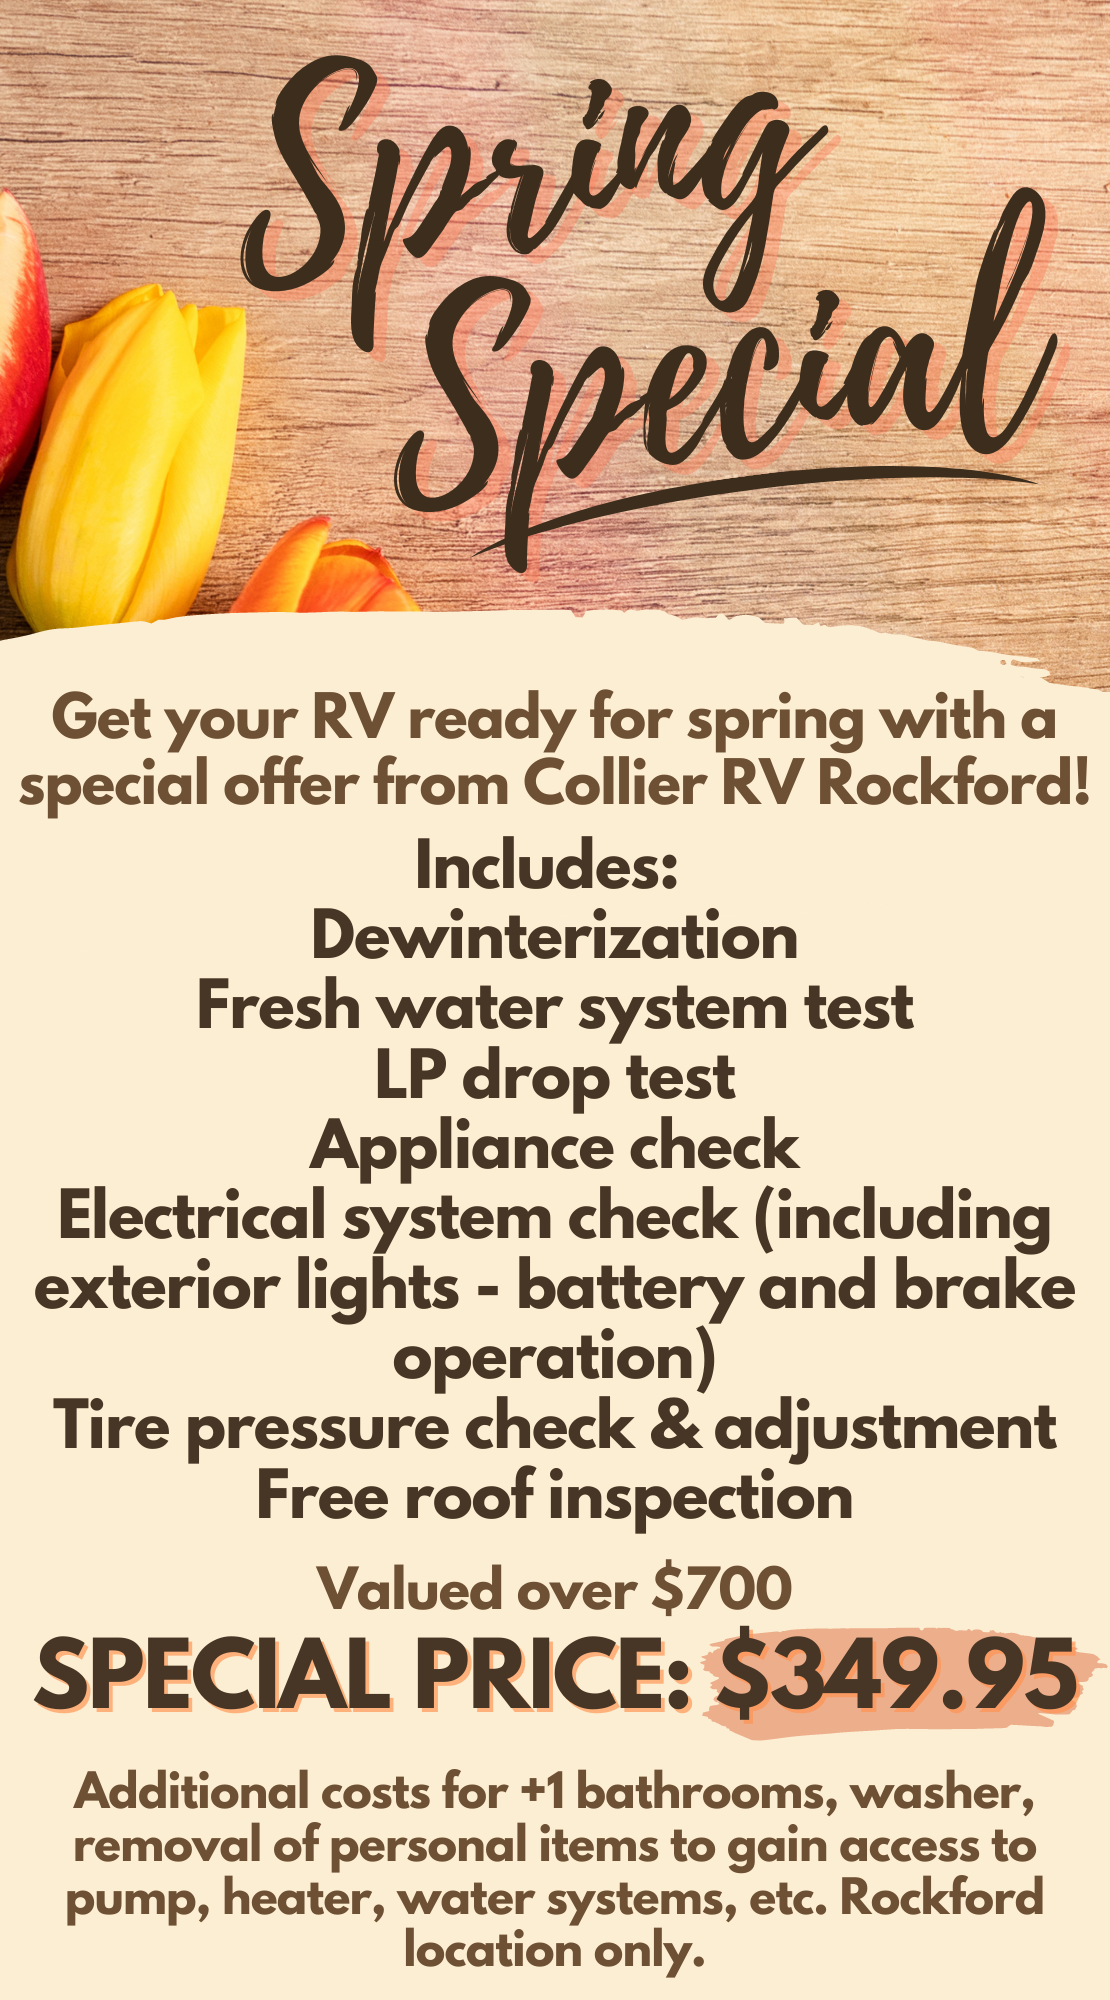 Spring Special! Get your RV ready for spring - Contact Us!